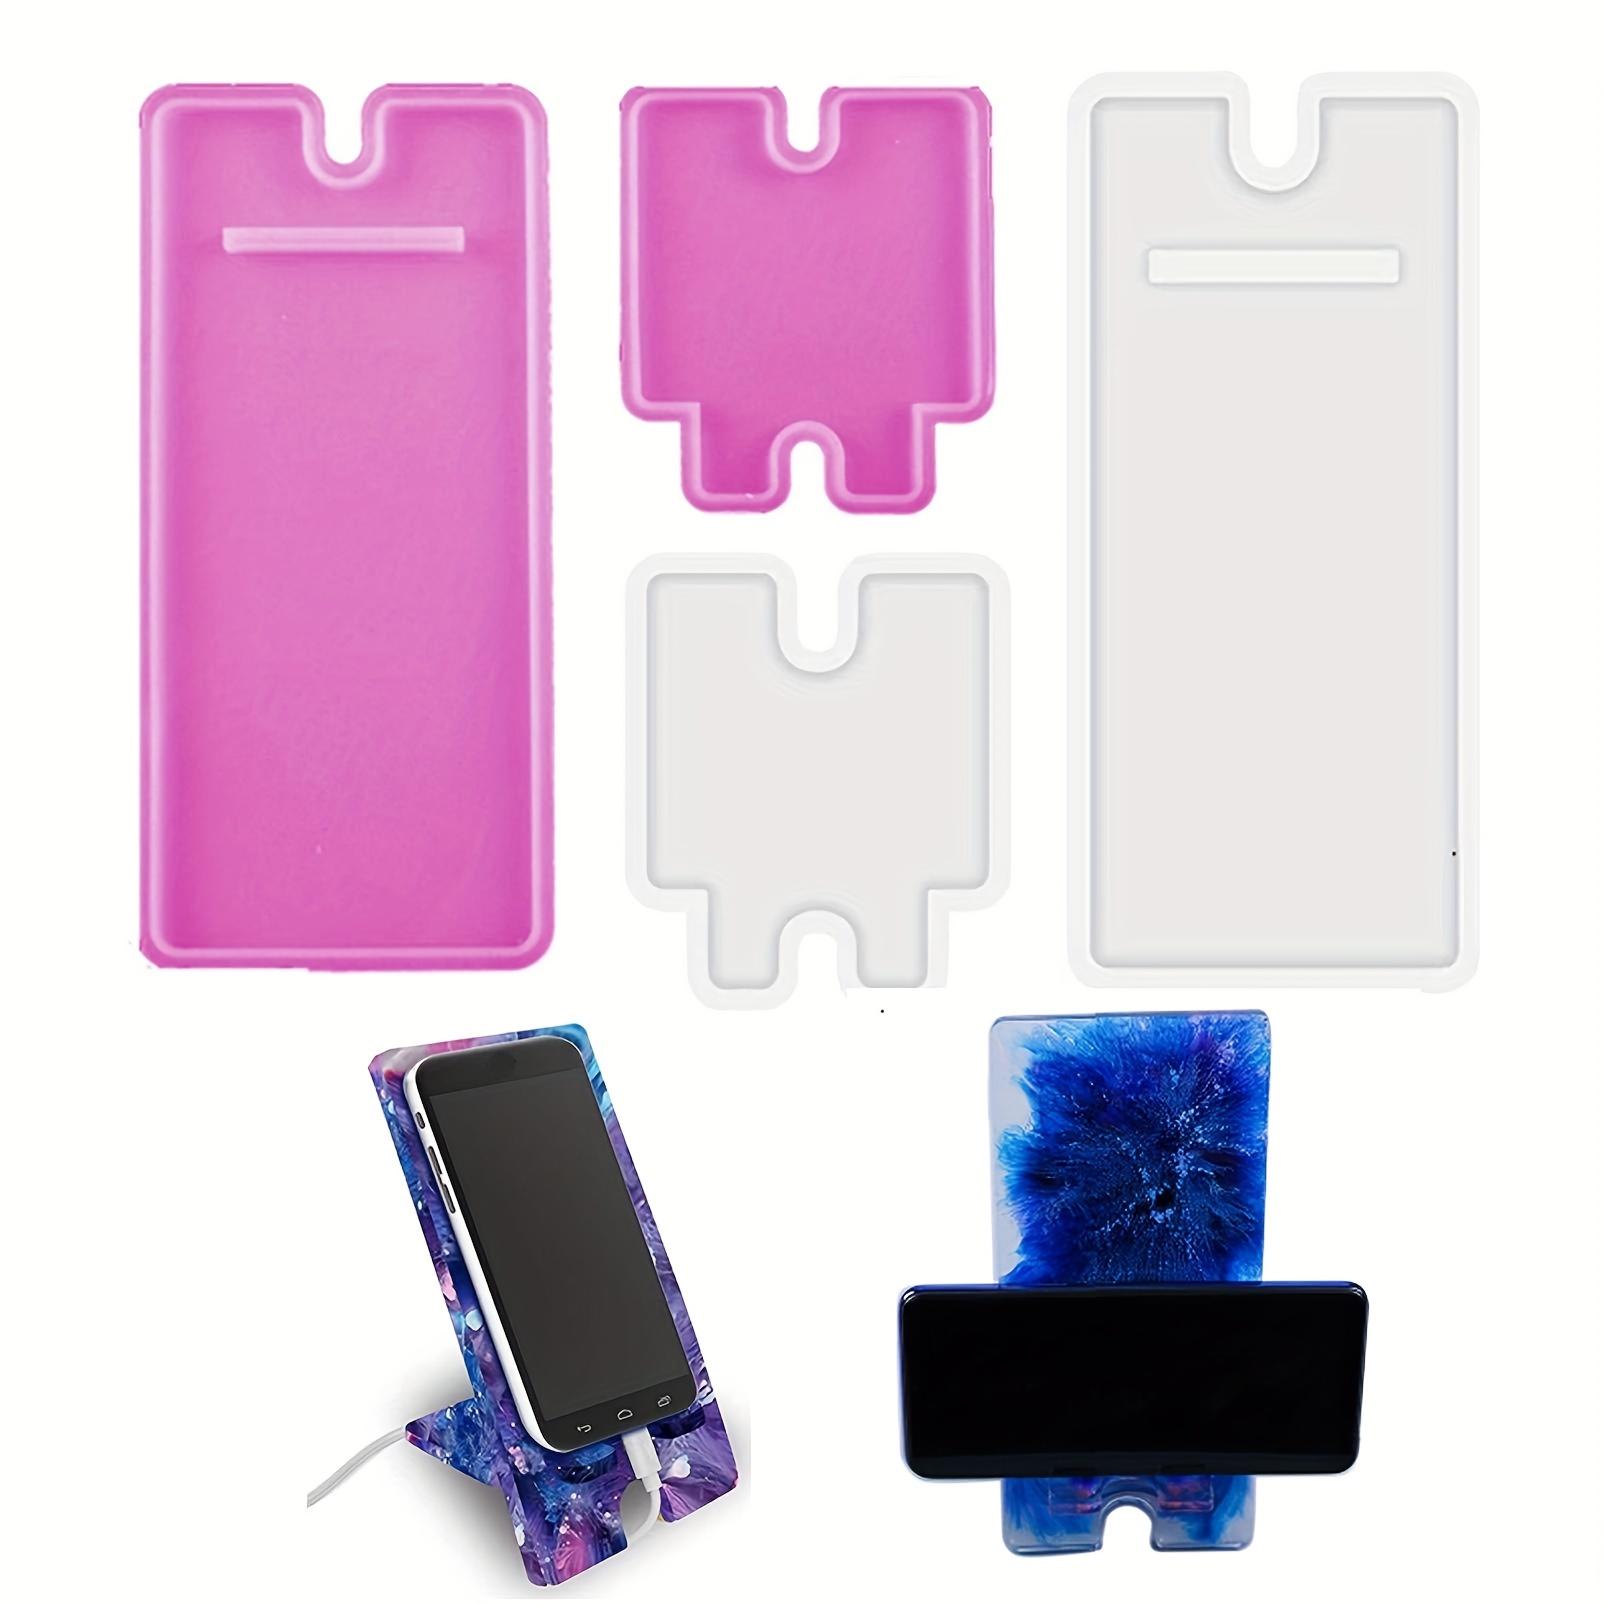 Irregular Mobile Phone Holder Epoxy Resin Mold For DIY Cell Phone Stand  Silicone Mould Phone Grip Bracket Desktop Support Tools